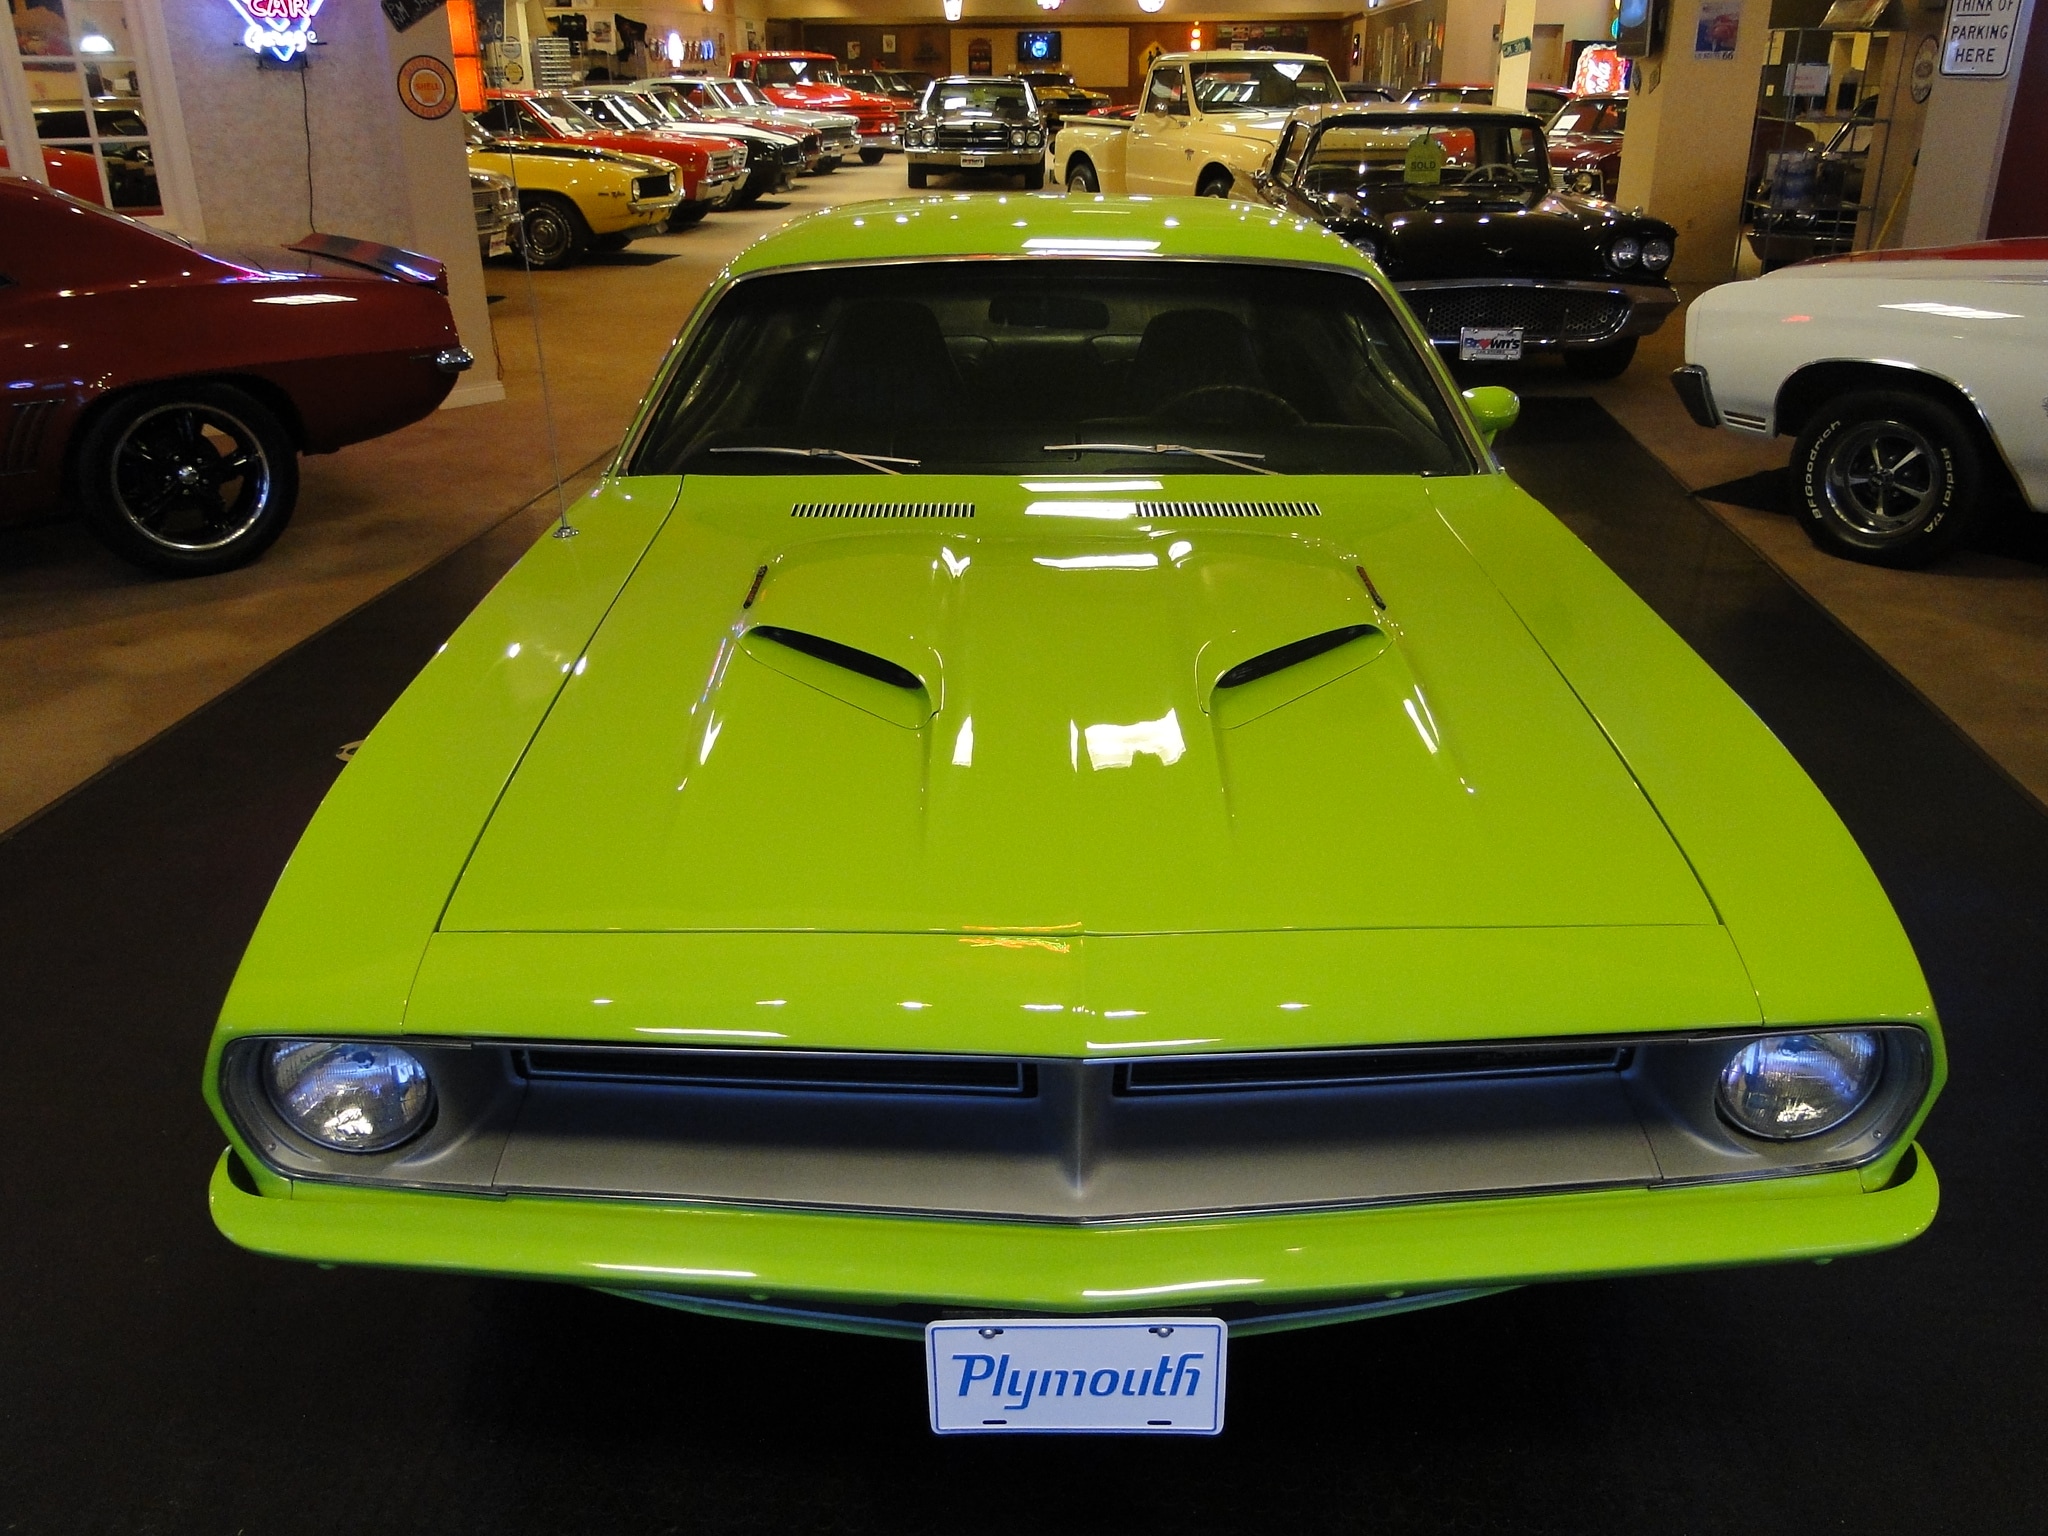 Used 1970 Plymouth Cuda 383 Grand Coupe For Sale | VA .